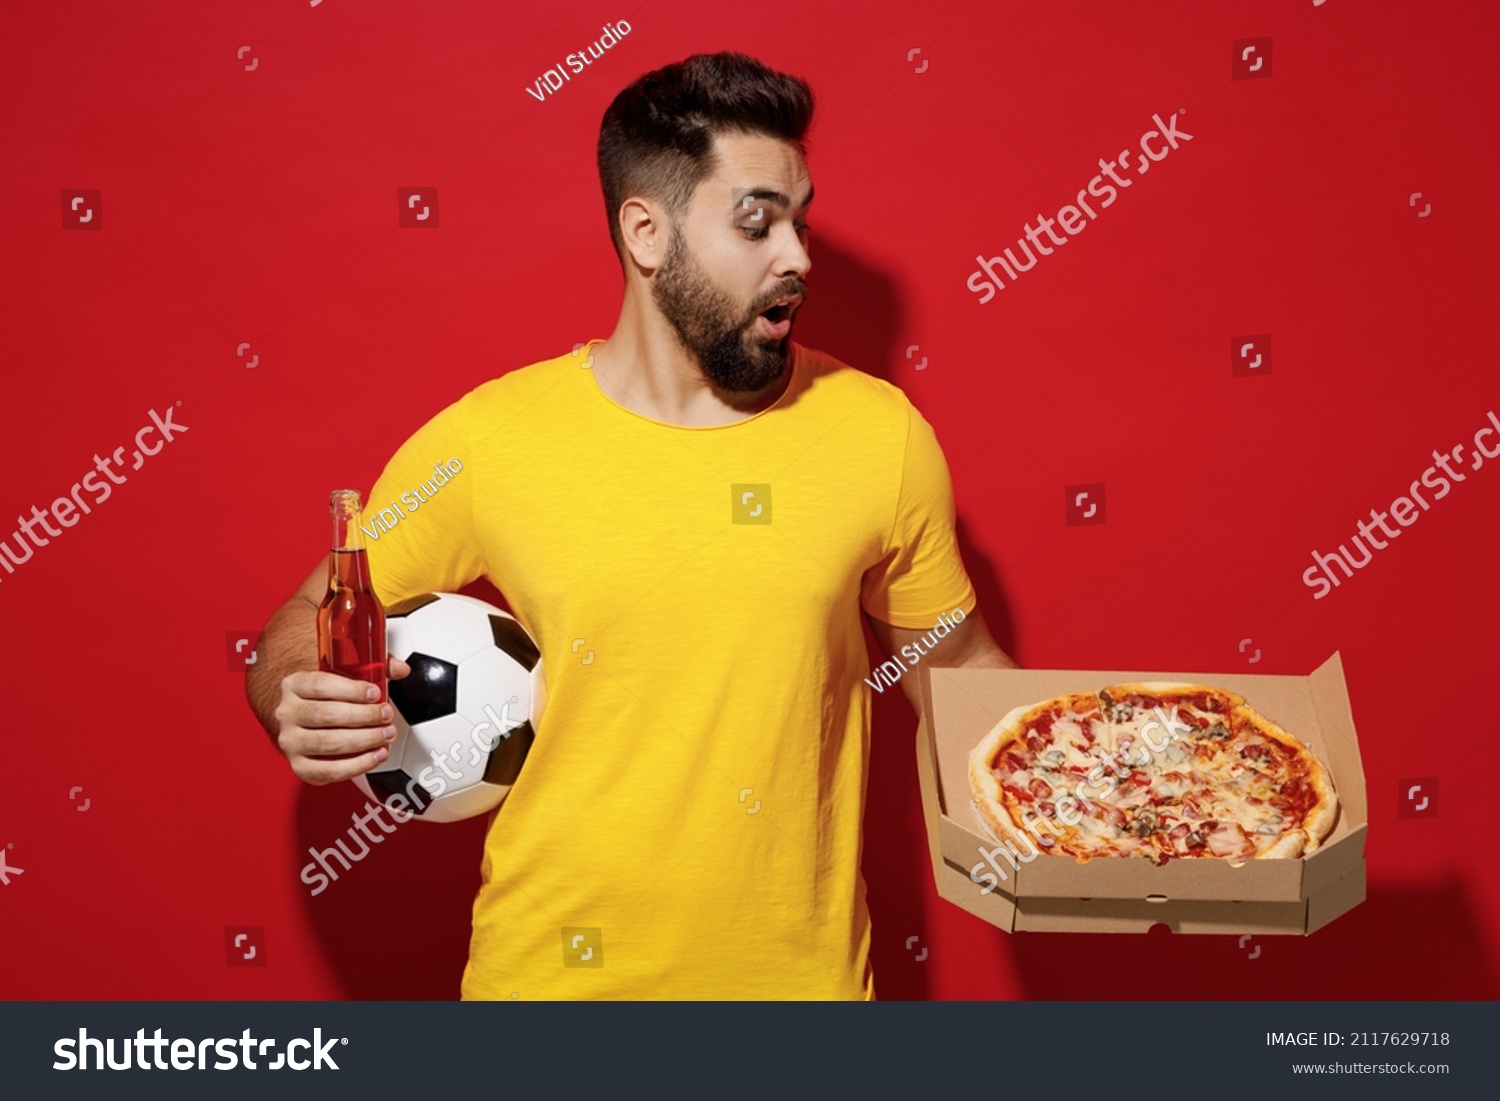 Young bearded man football fan in yellow t-shirt cheer up support favorite team hold soccer ball look at italian pizza in cardboard flatbox beer isolated on plain dark red background studio portrait #2117629718